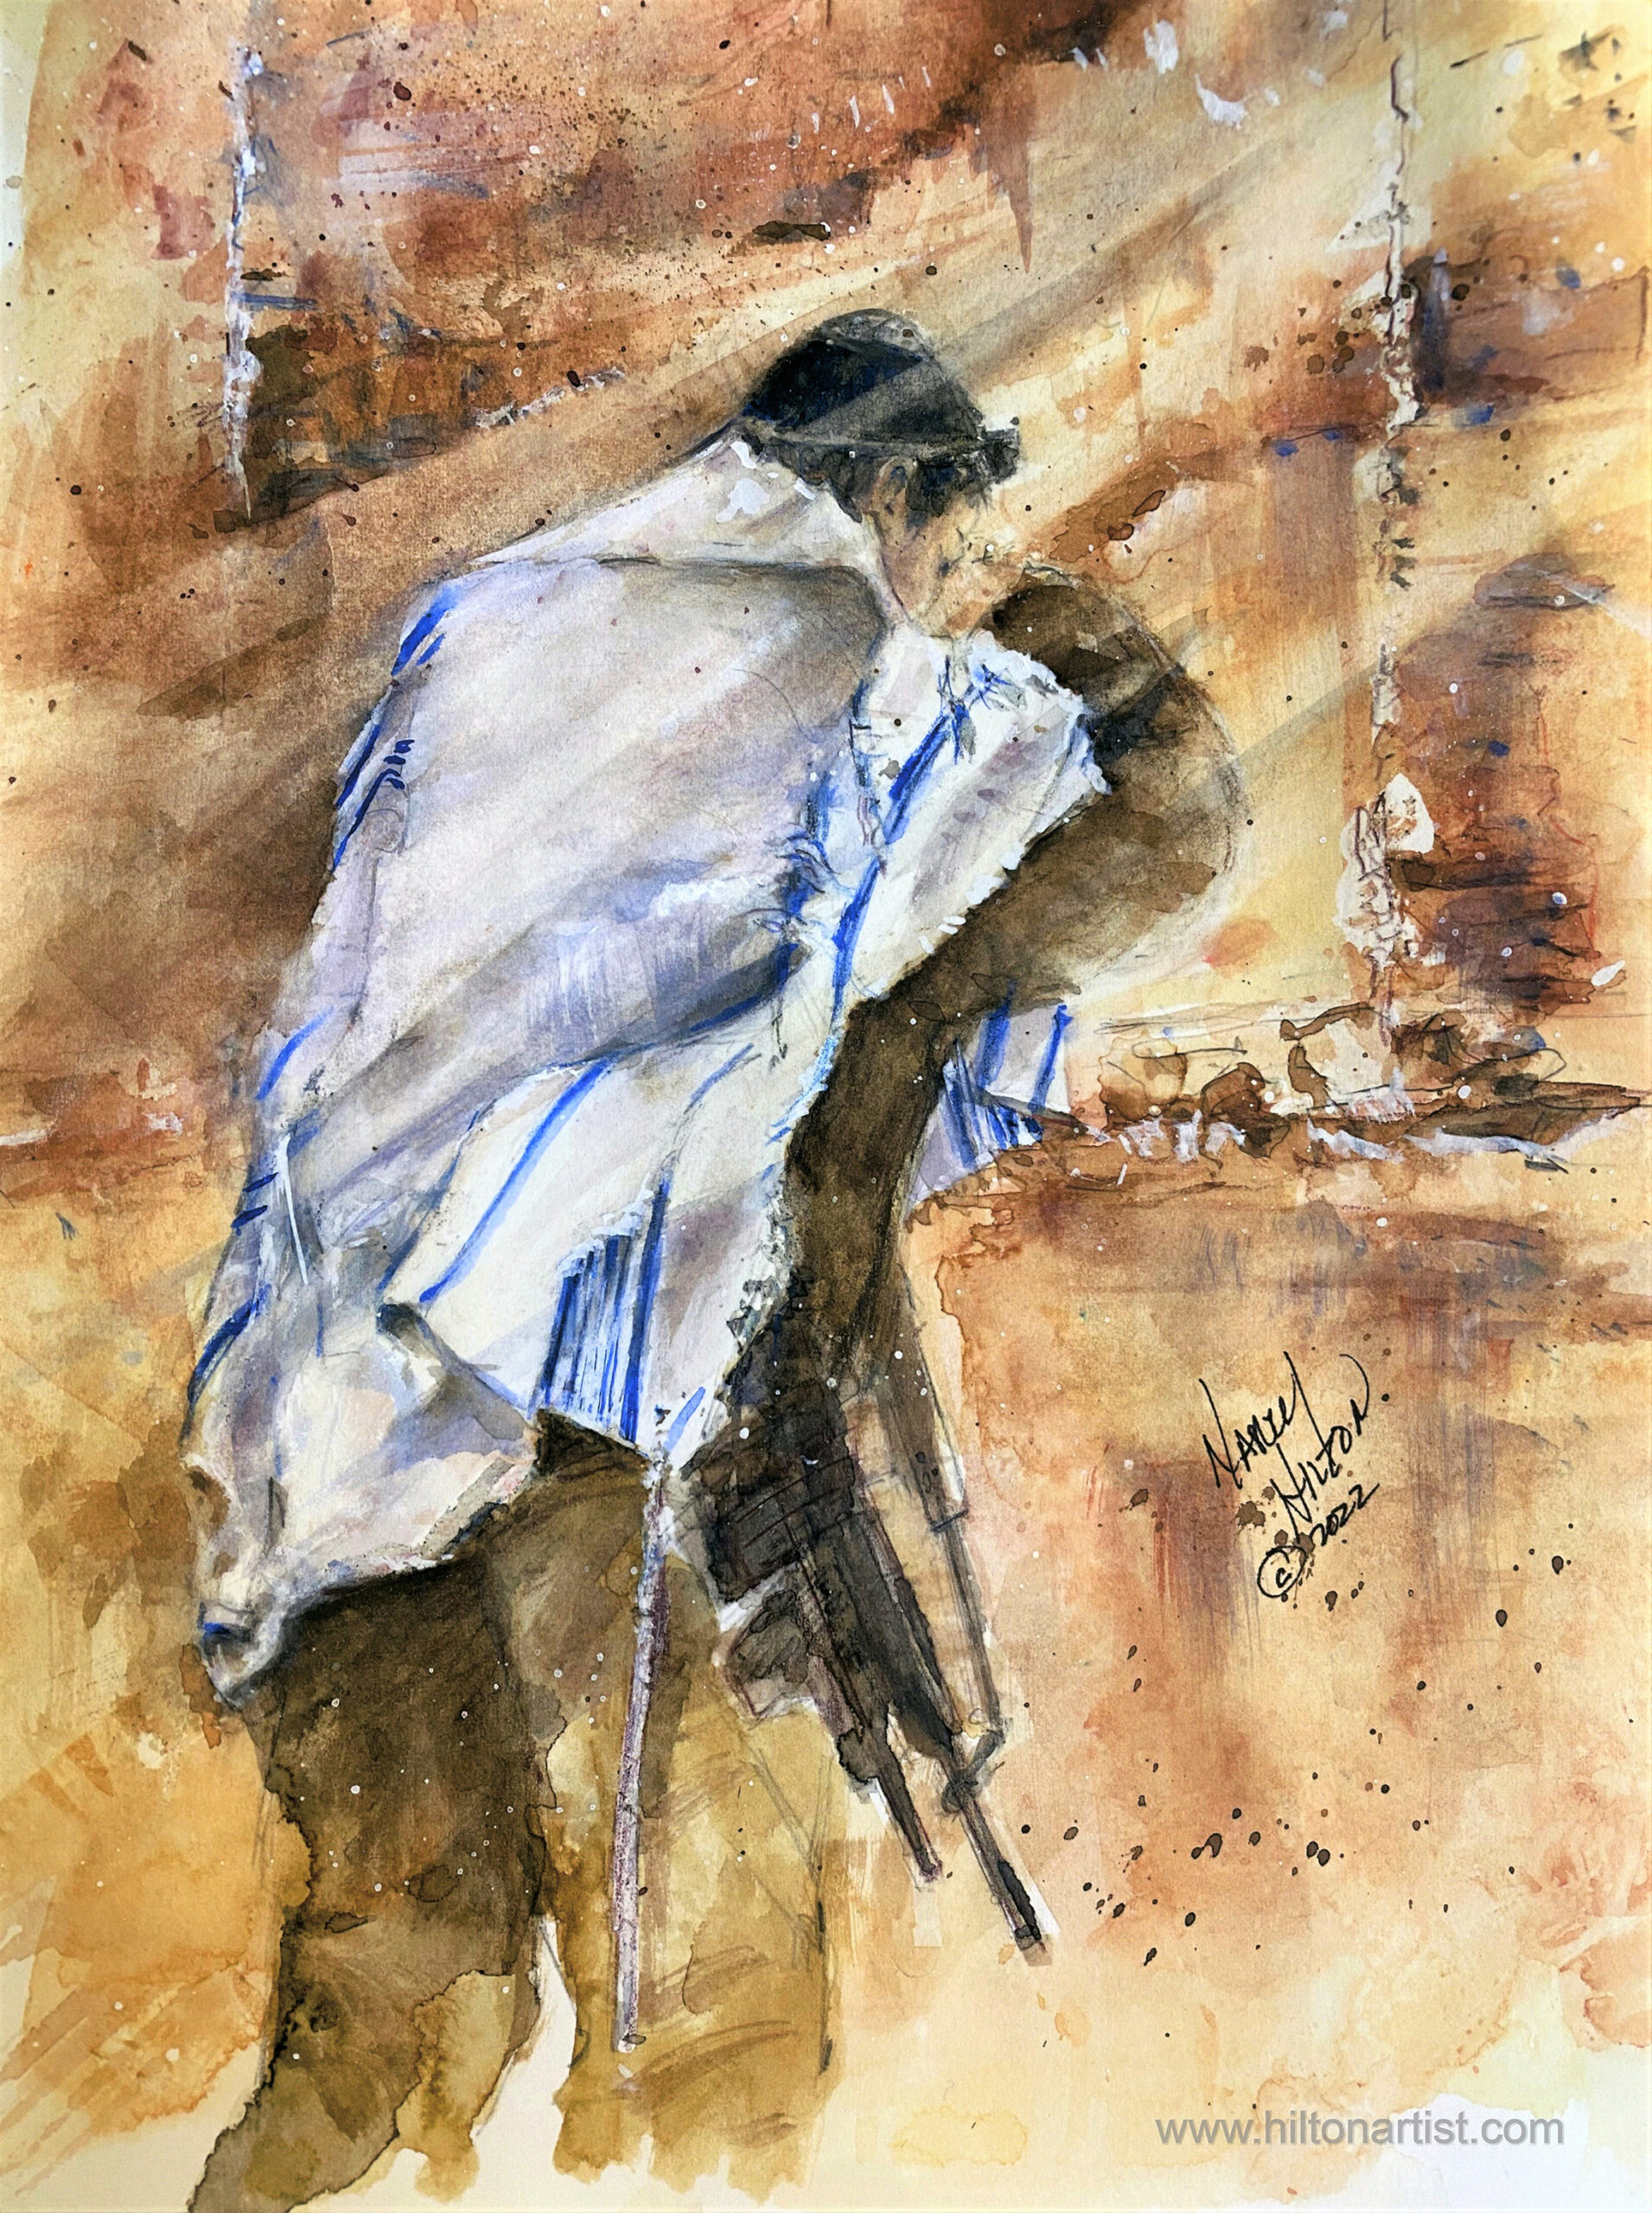 Soldier praying at the Western Wall